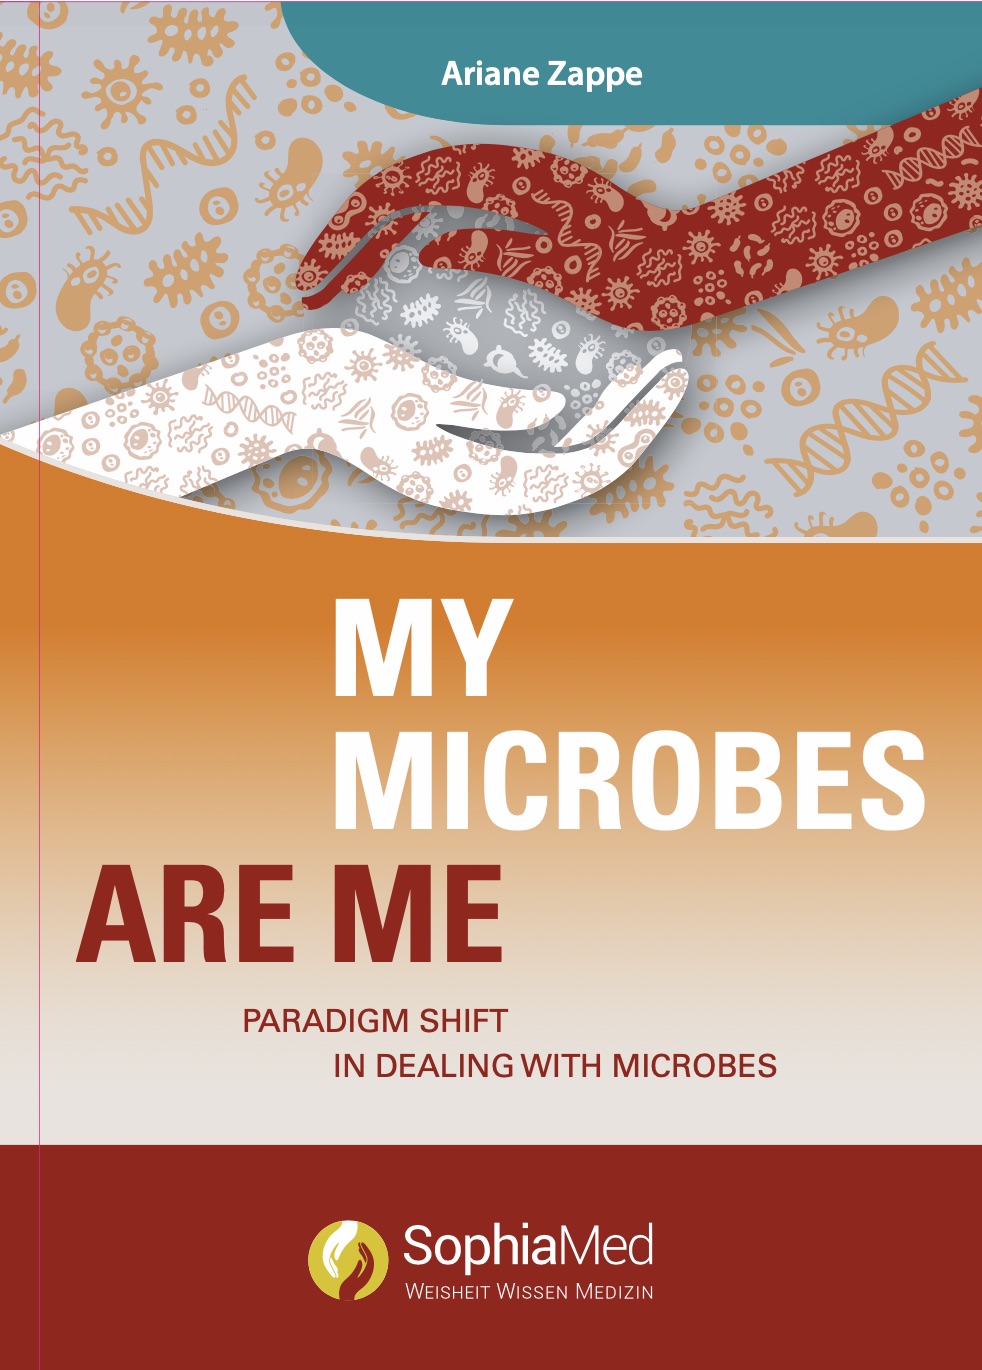 Book "My Microbes are Me" 